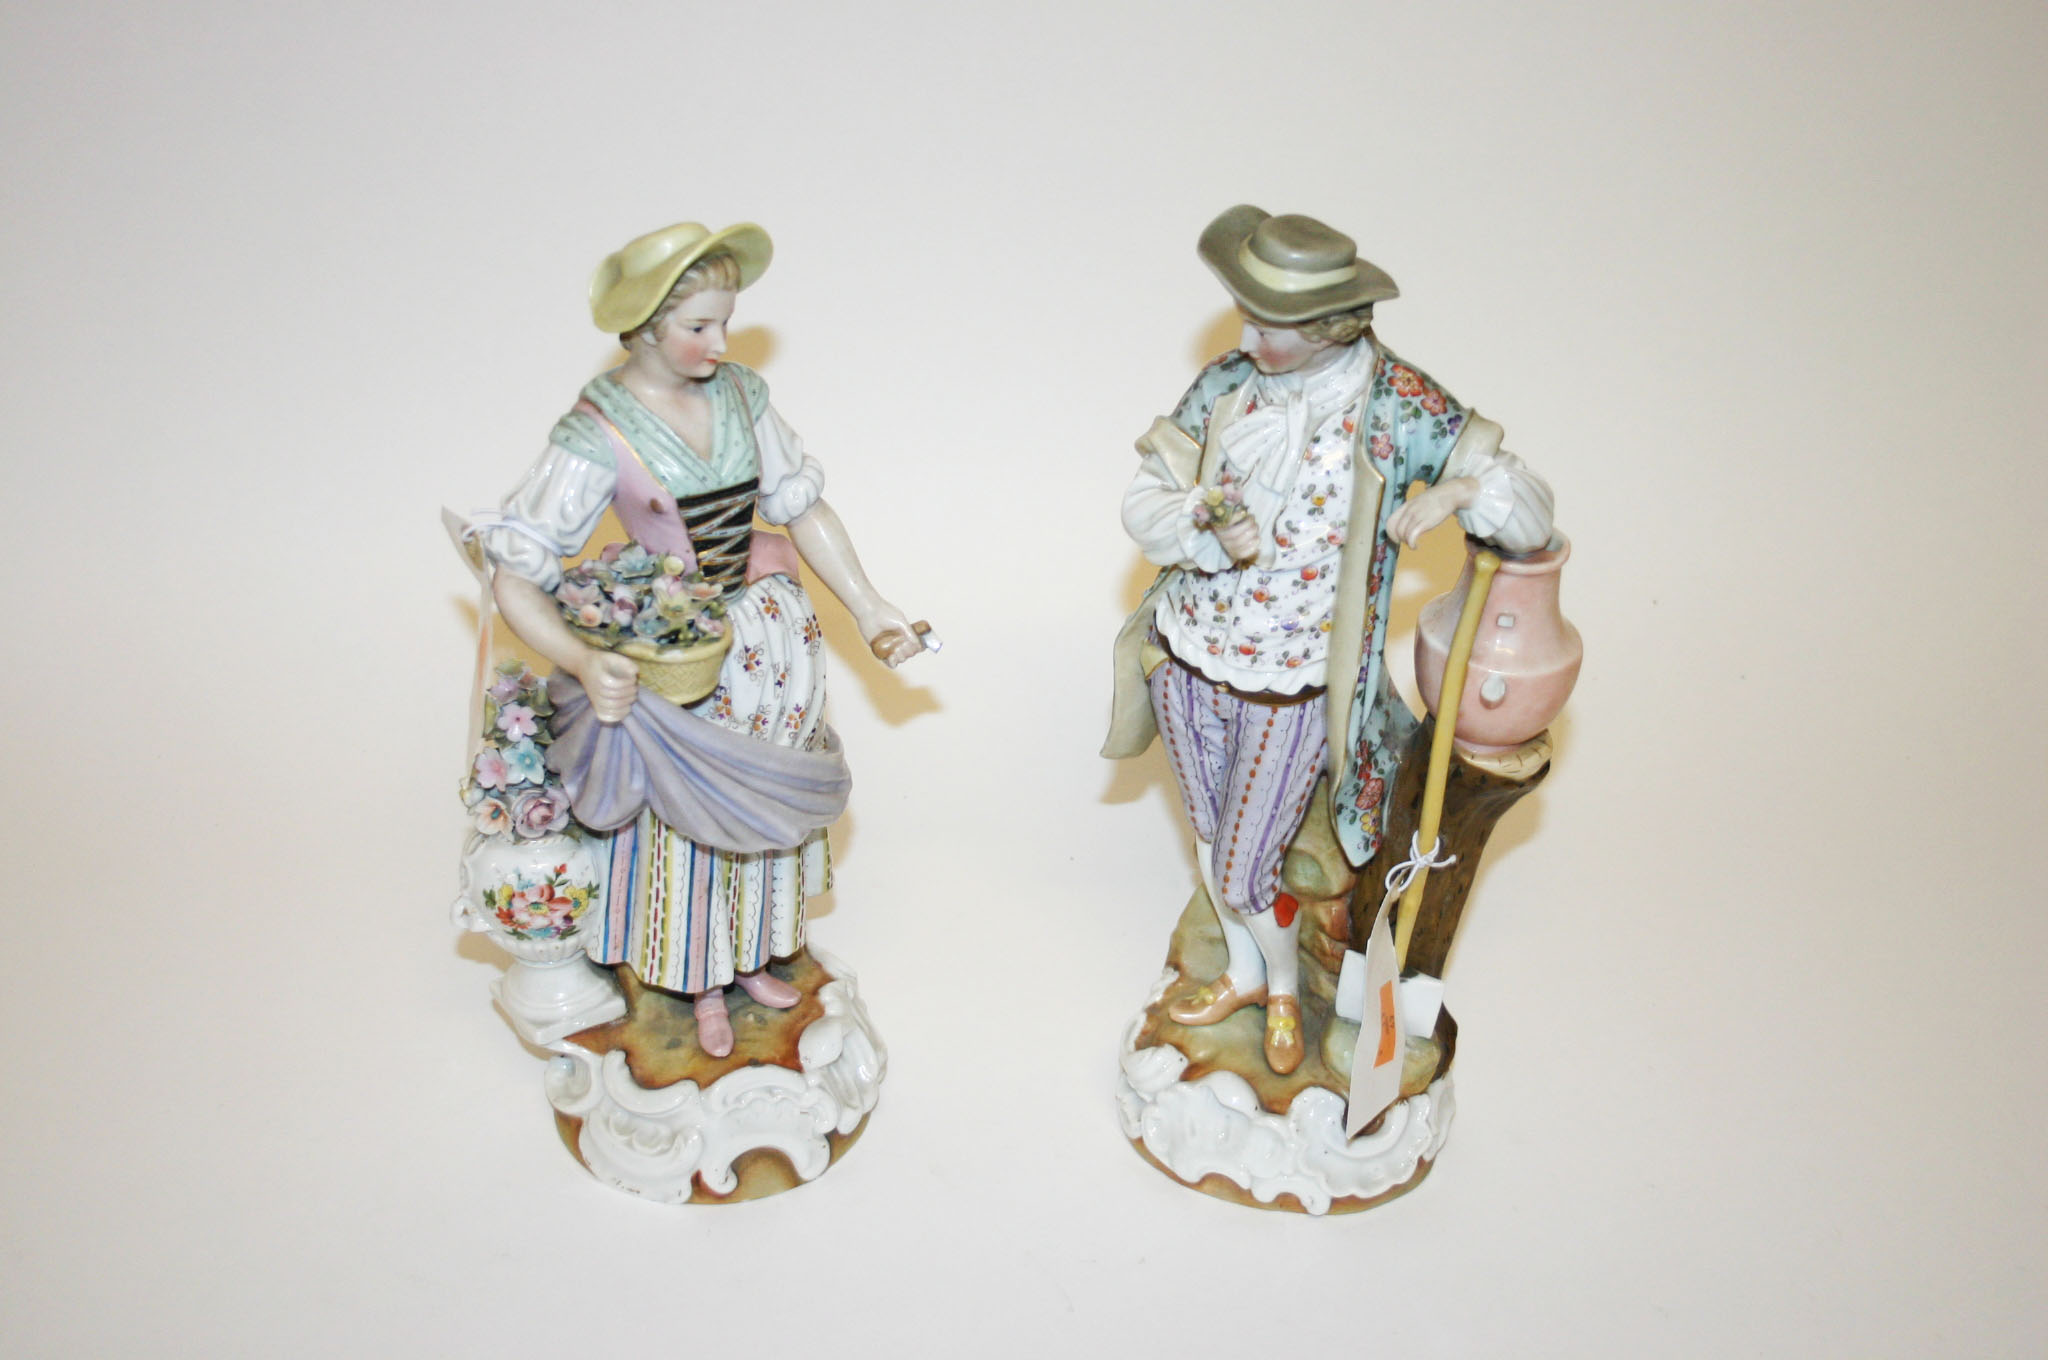 A PAIR OF GERMAN PORCELAIN FIGURES, early 20th century, one modelled as a lady with basket of